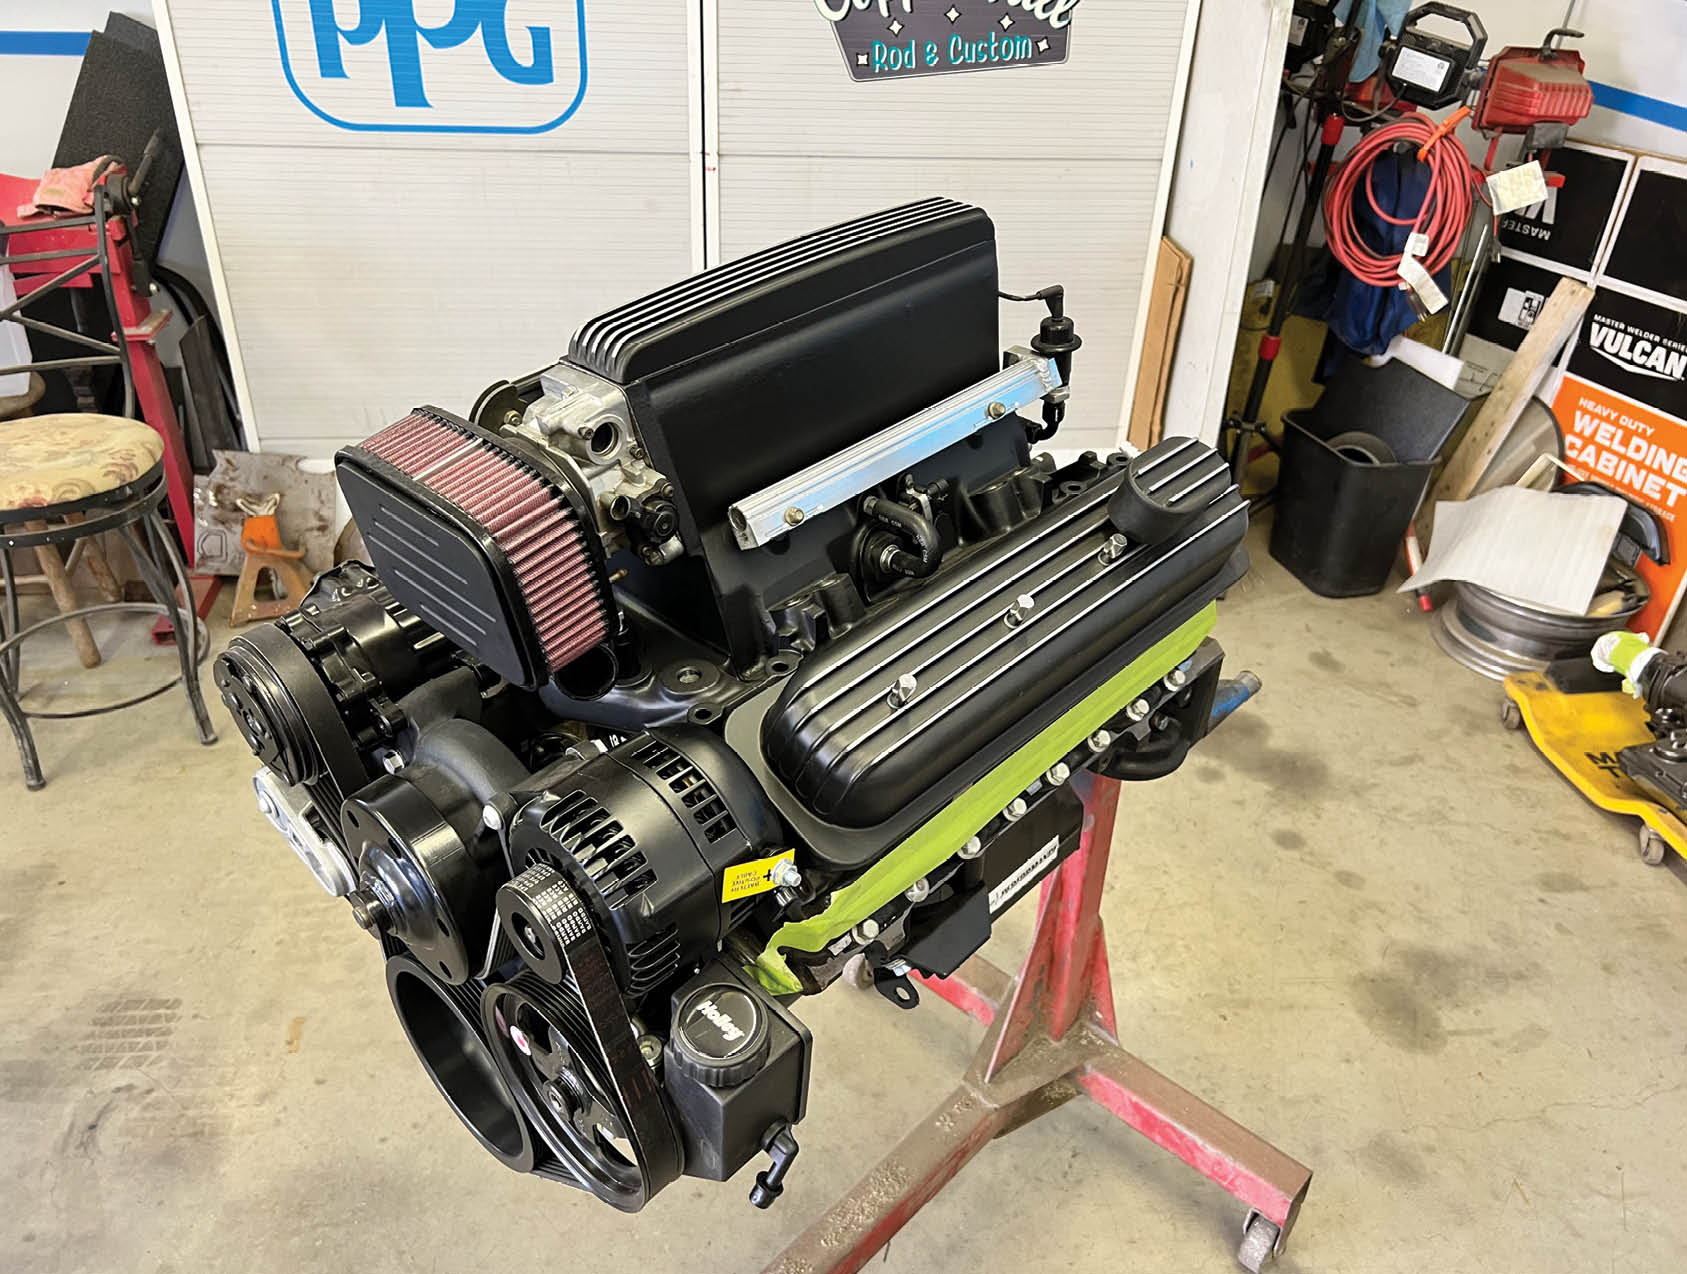 Sinon chose an unusual engine for his truck. It’s a circle track race engine for factory stock classes—it’s been topped with Chevrolet Performance Ram Jet fuel injection.